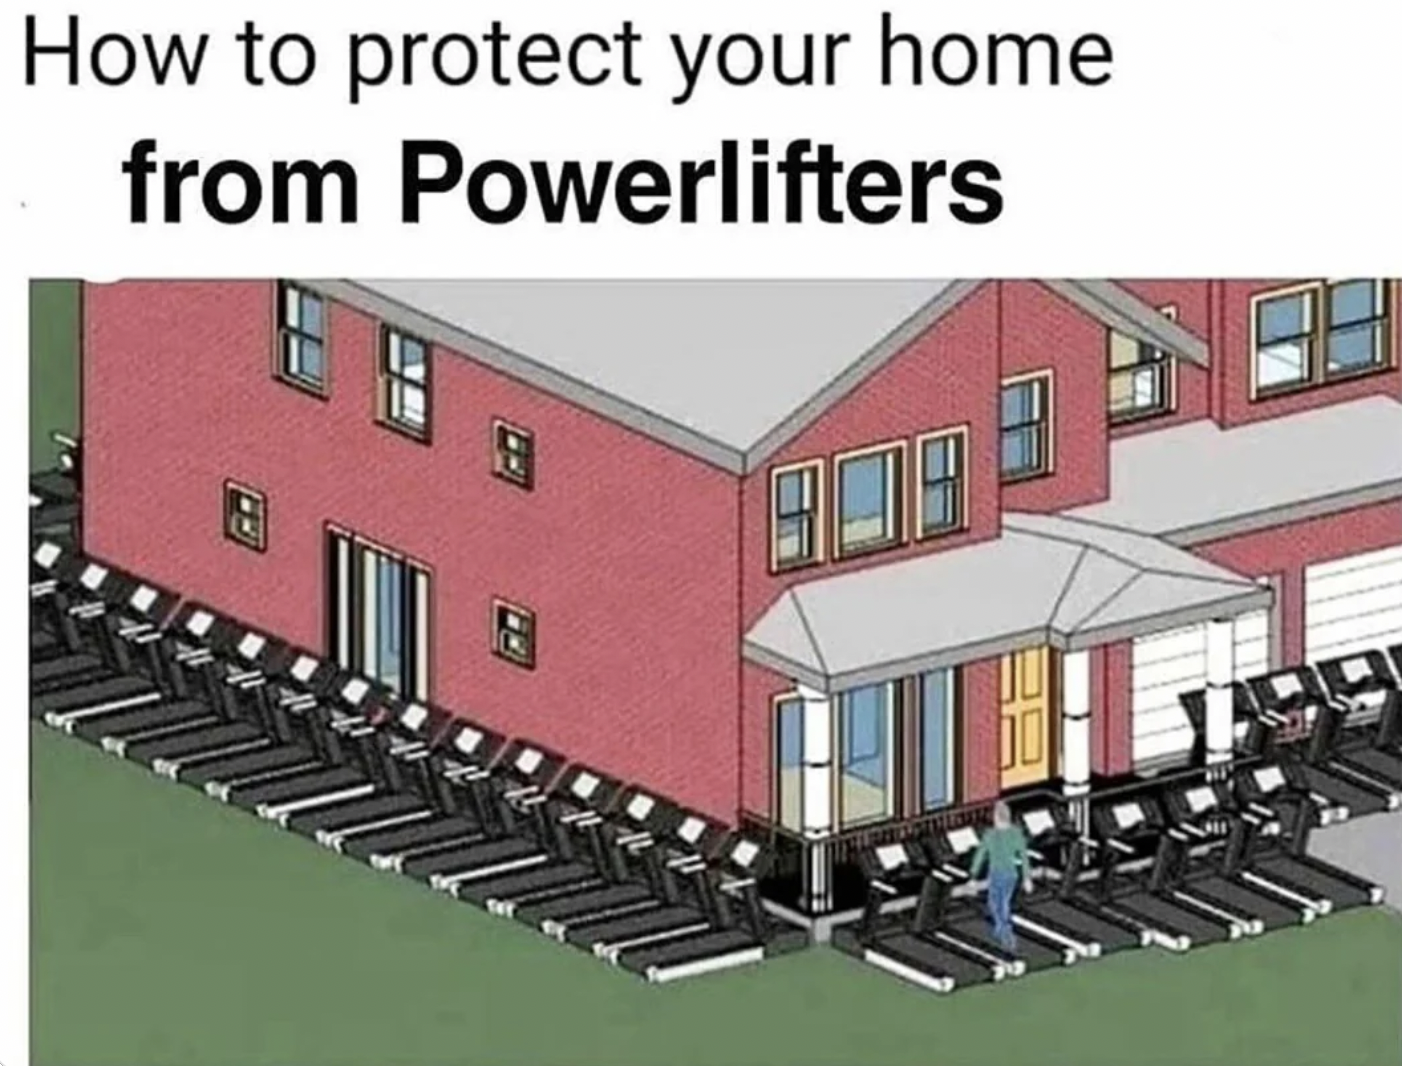 architecture - How to protect your home from Powerlifters 19093